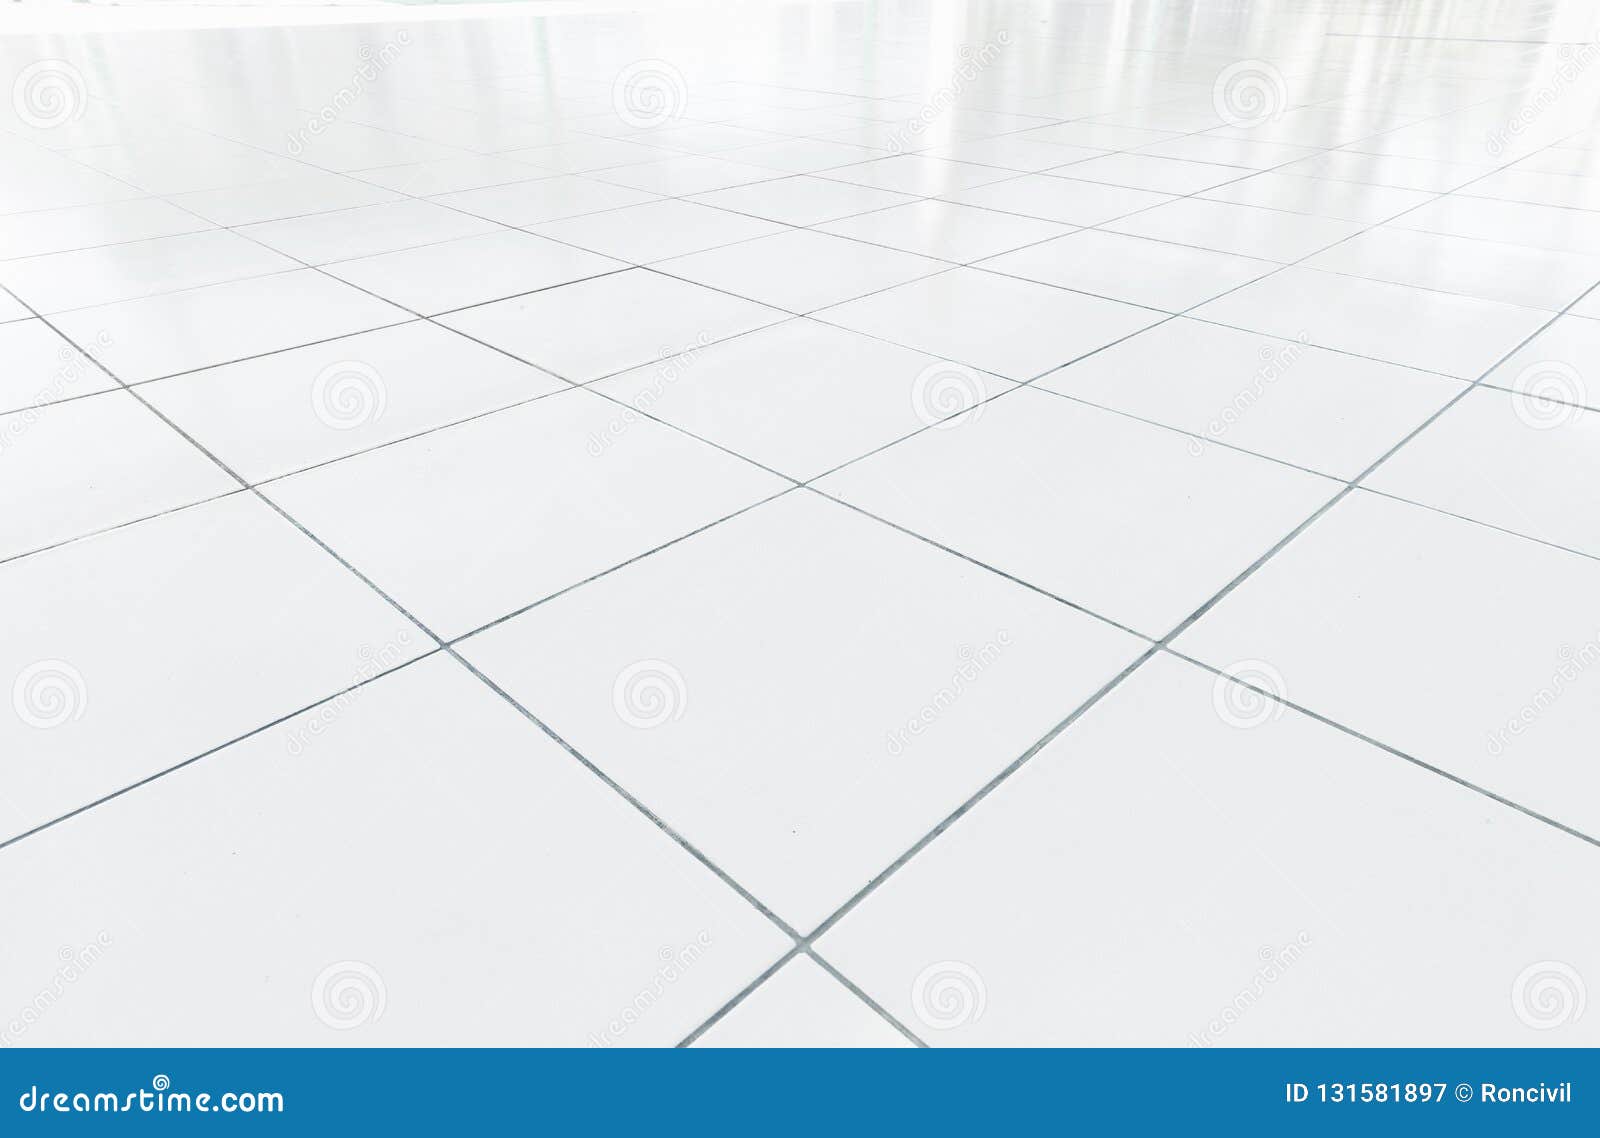 White Tile Floor Clean Condition With Grid Line For Background Stock Image Image of blank